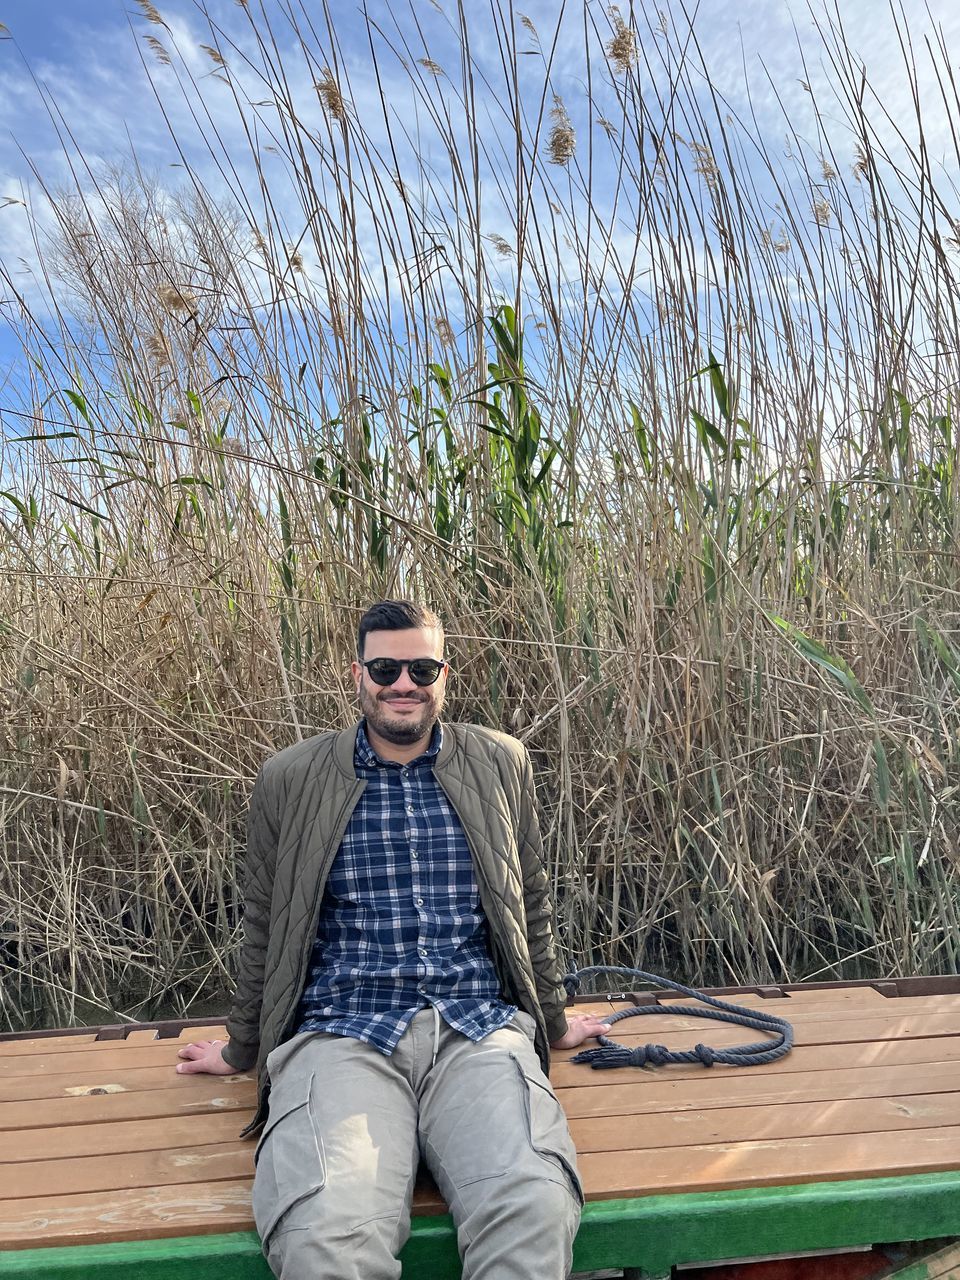 one person, leisure activity, day, lifestyles, nature, water, men, casual clothing, low section, plant, adult, human leg, outdoors, tree, high angle view, spring, shoe, relaxation, grass, lake, clothing, standing, wood, footwear, personal perspective, blue